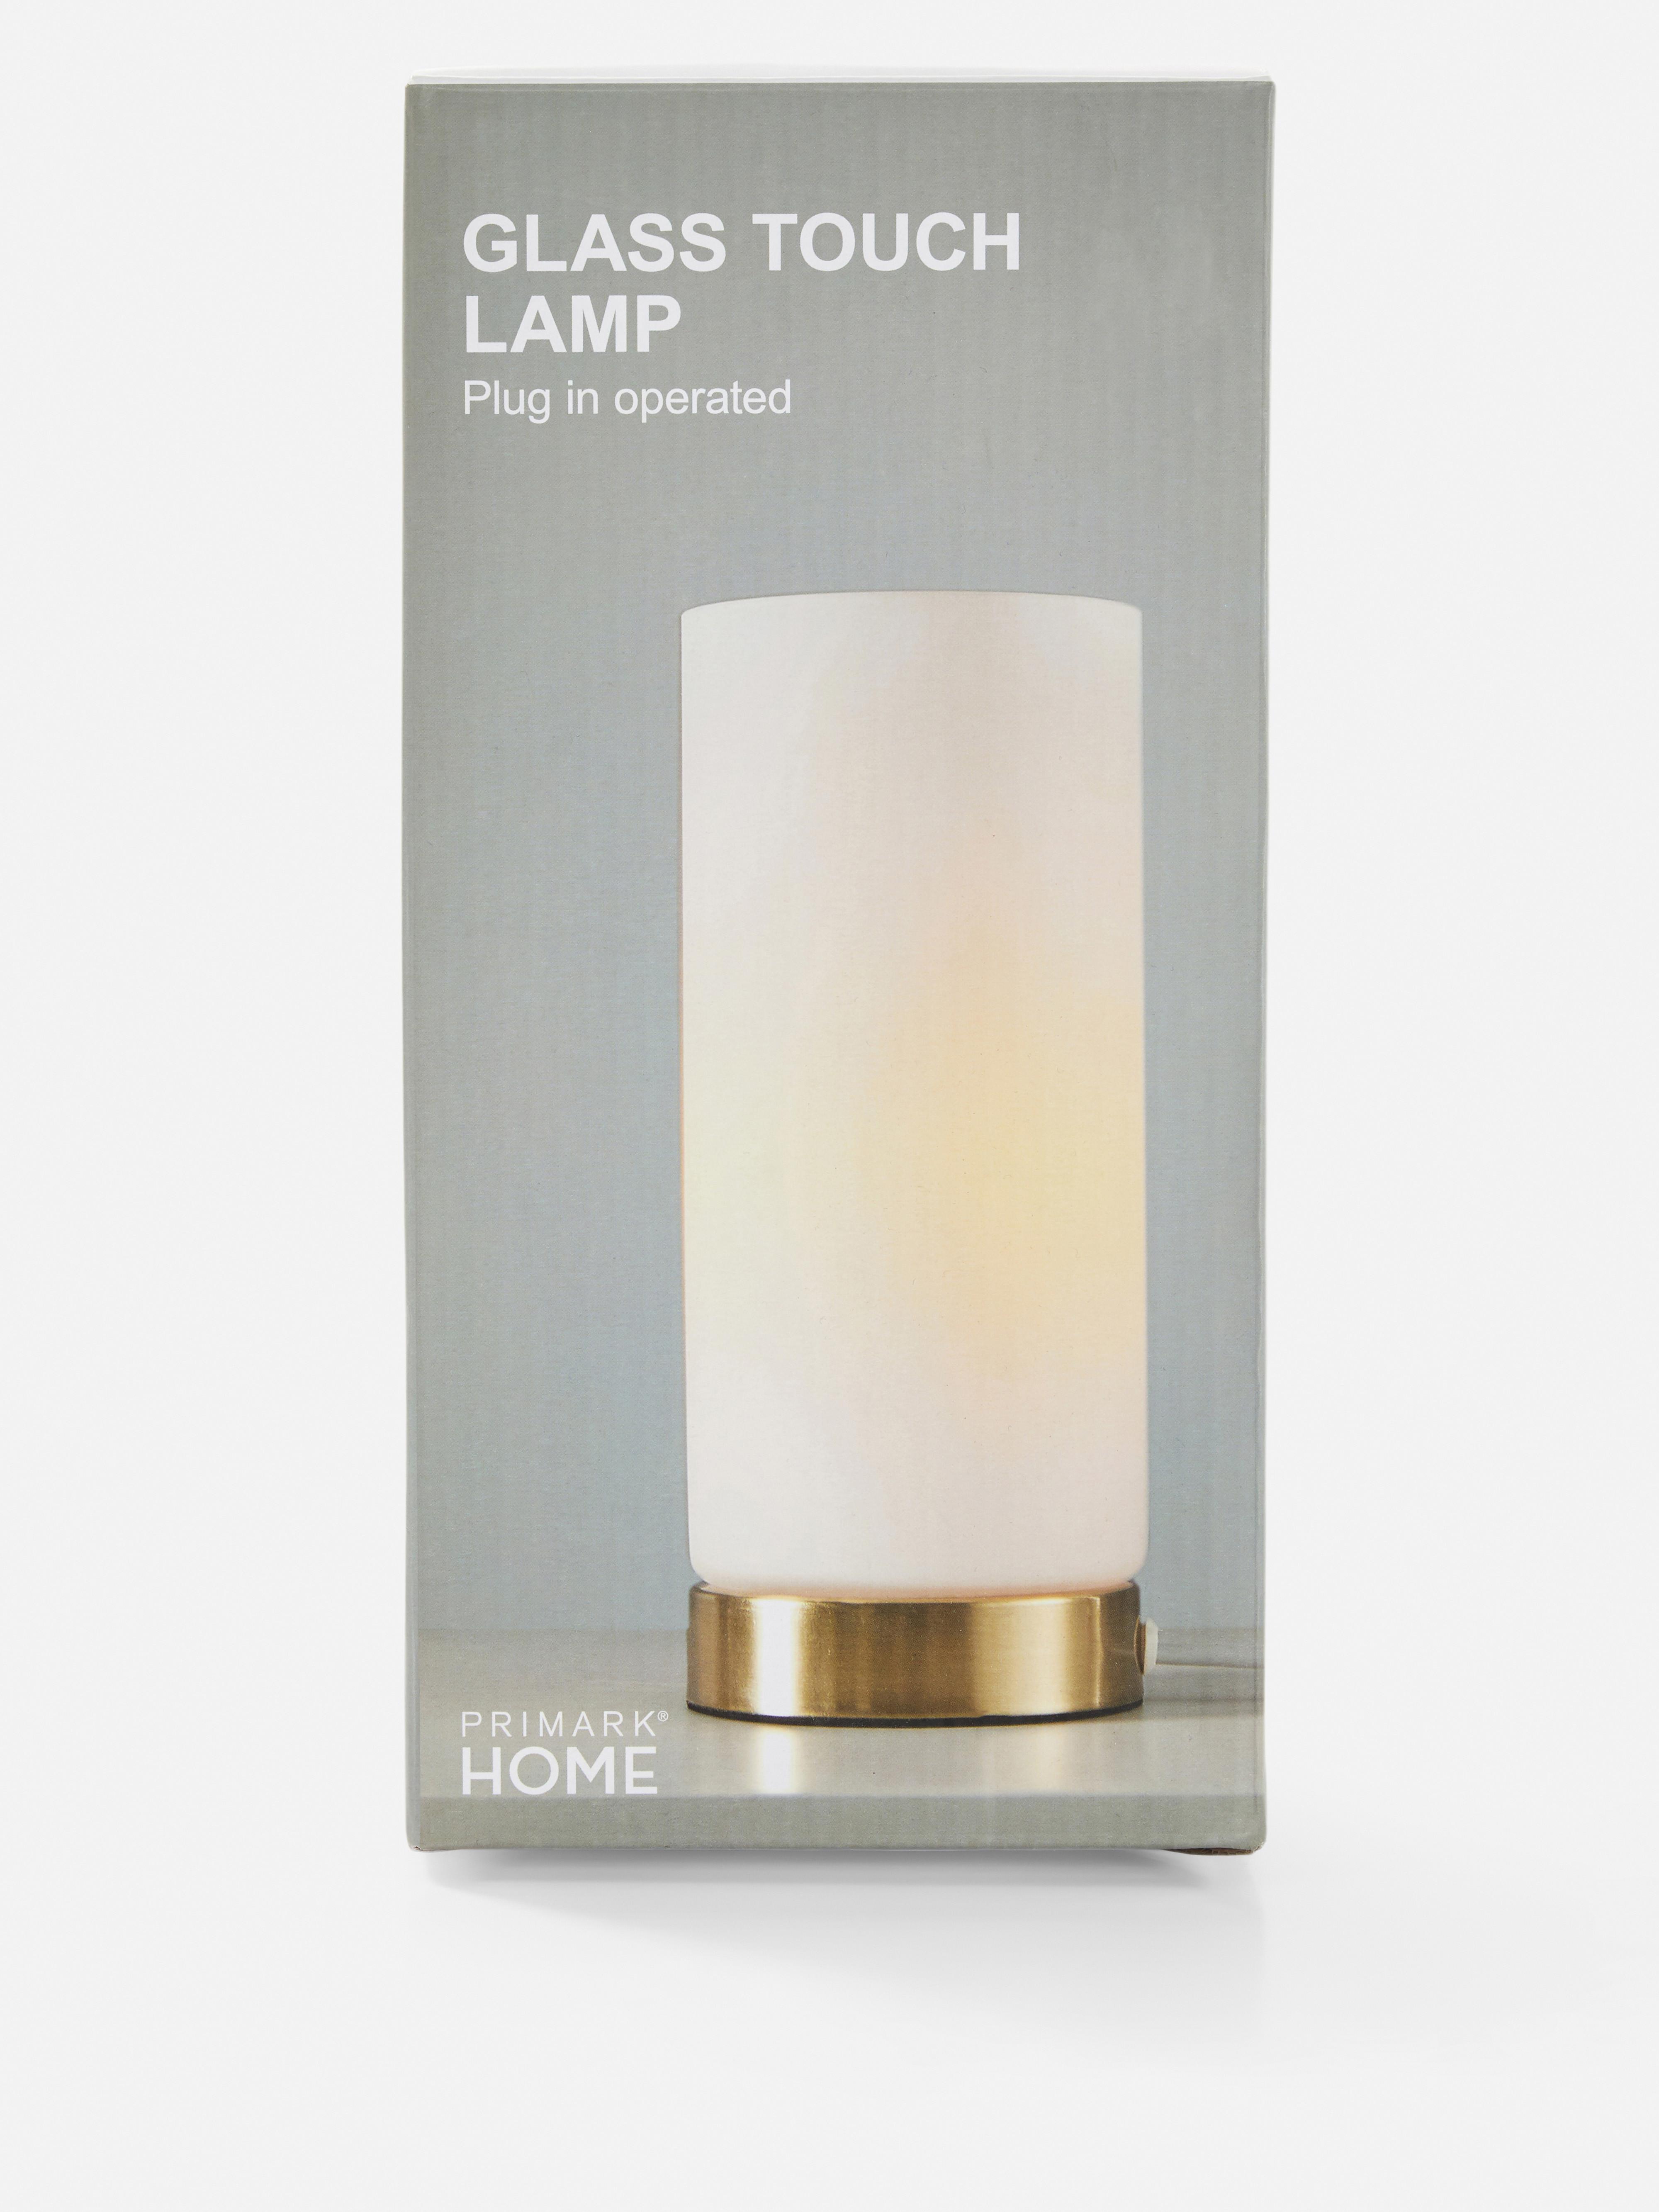 Glass Touch Lamp